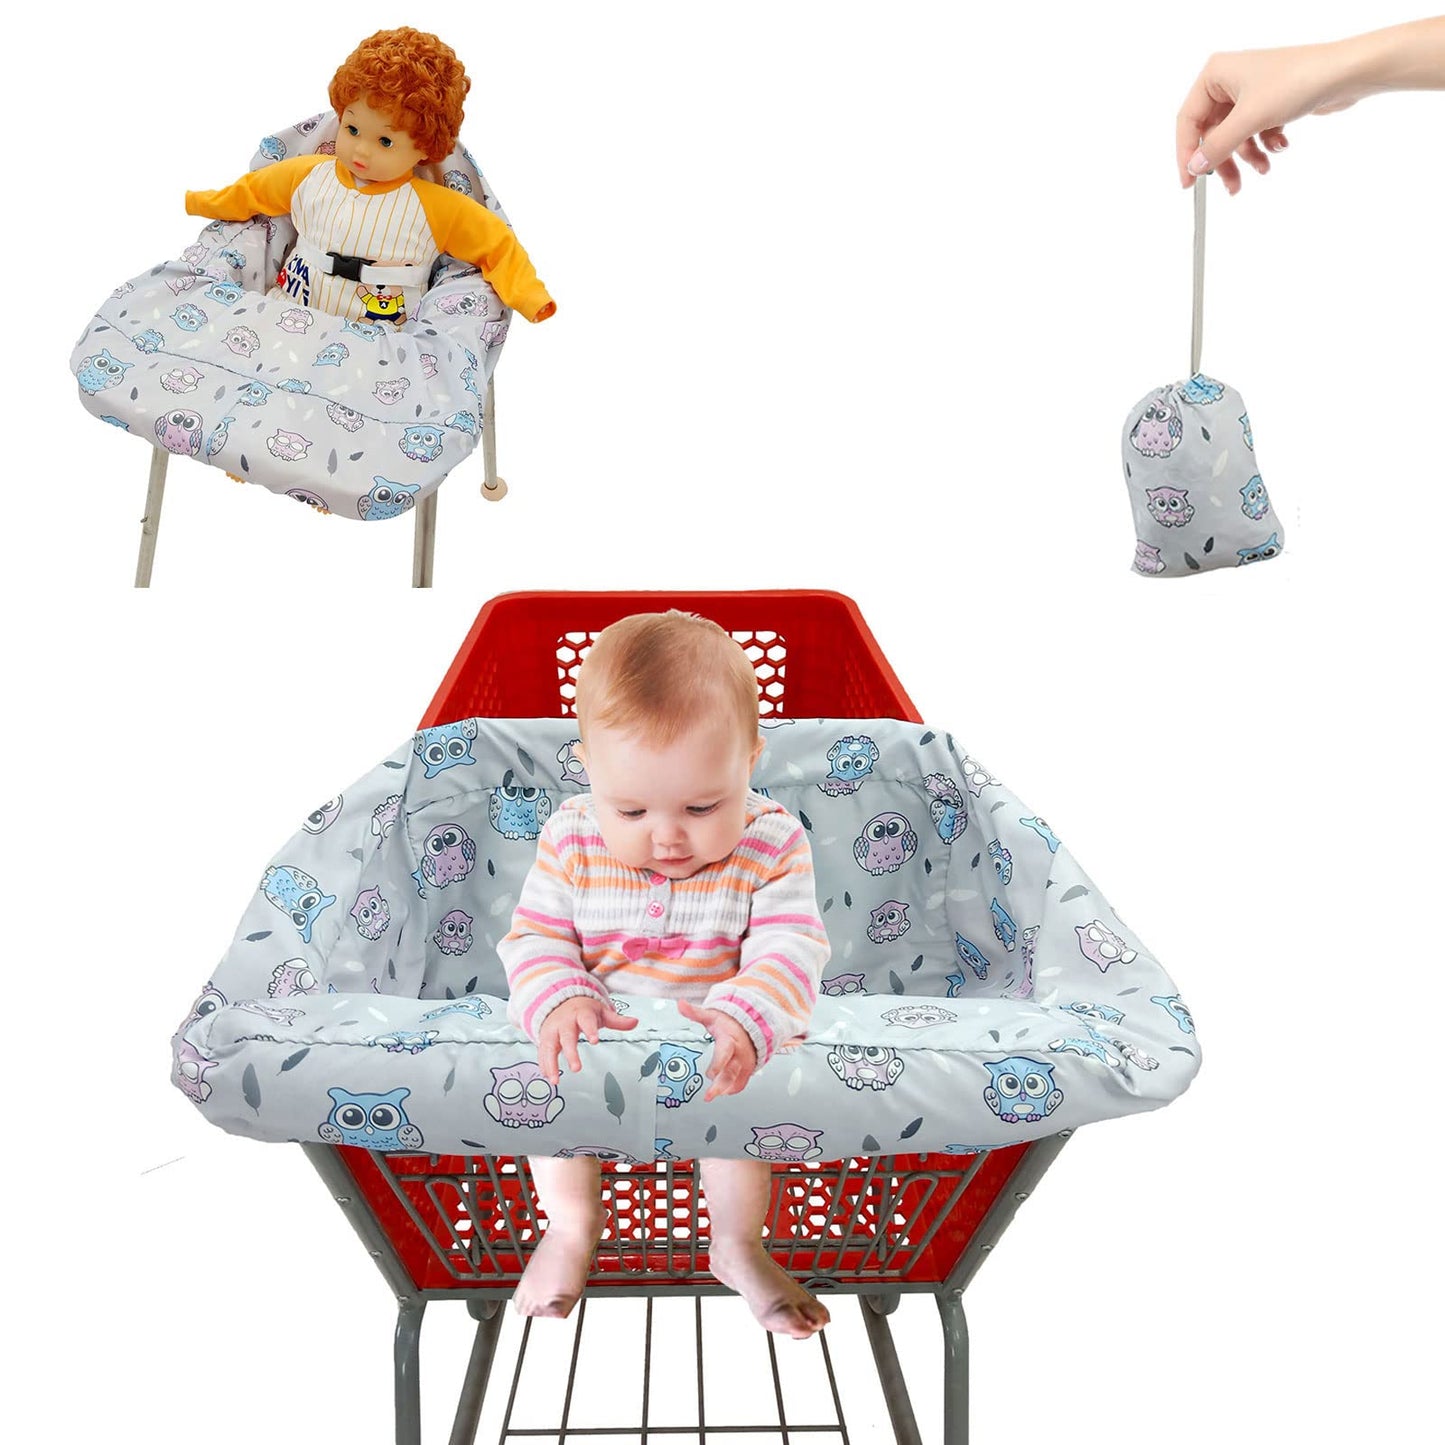 Pozico Shopping Cart Cover for Baby or High Chair Cover,Baby Shopping Cart Cover Machine Washable/Free Portable Cloth Bag-Owl